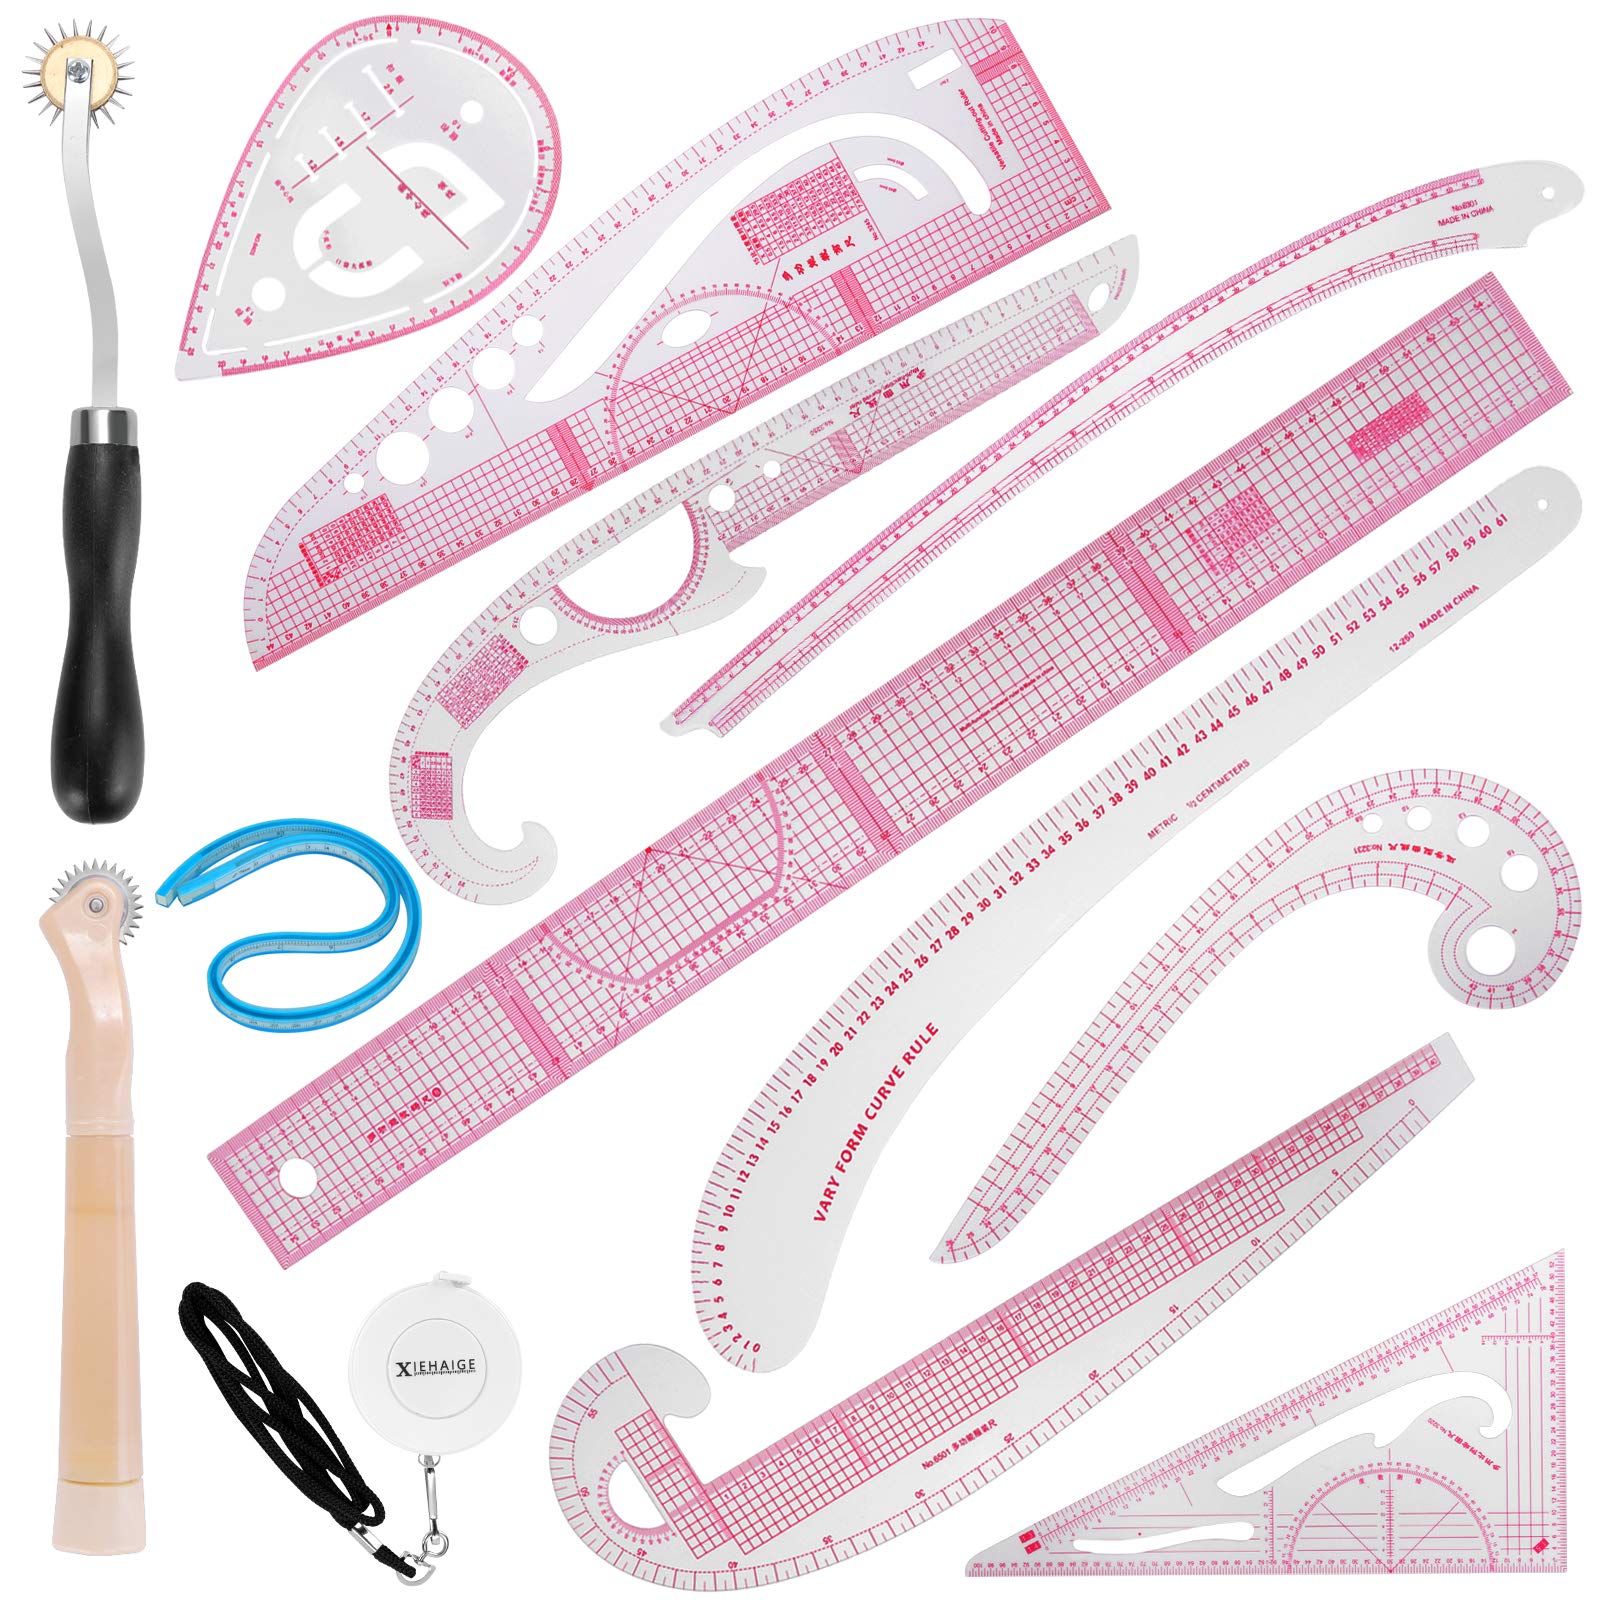 13PCS Styling Sewing French Curve Ruler Set, Dress India